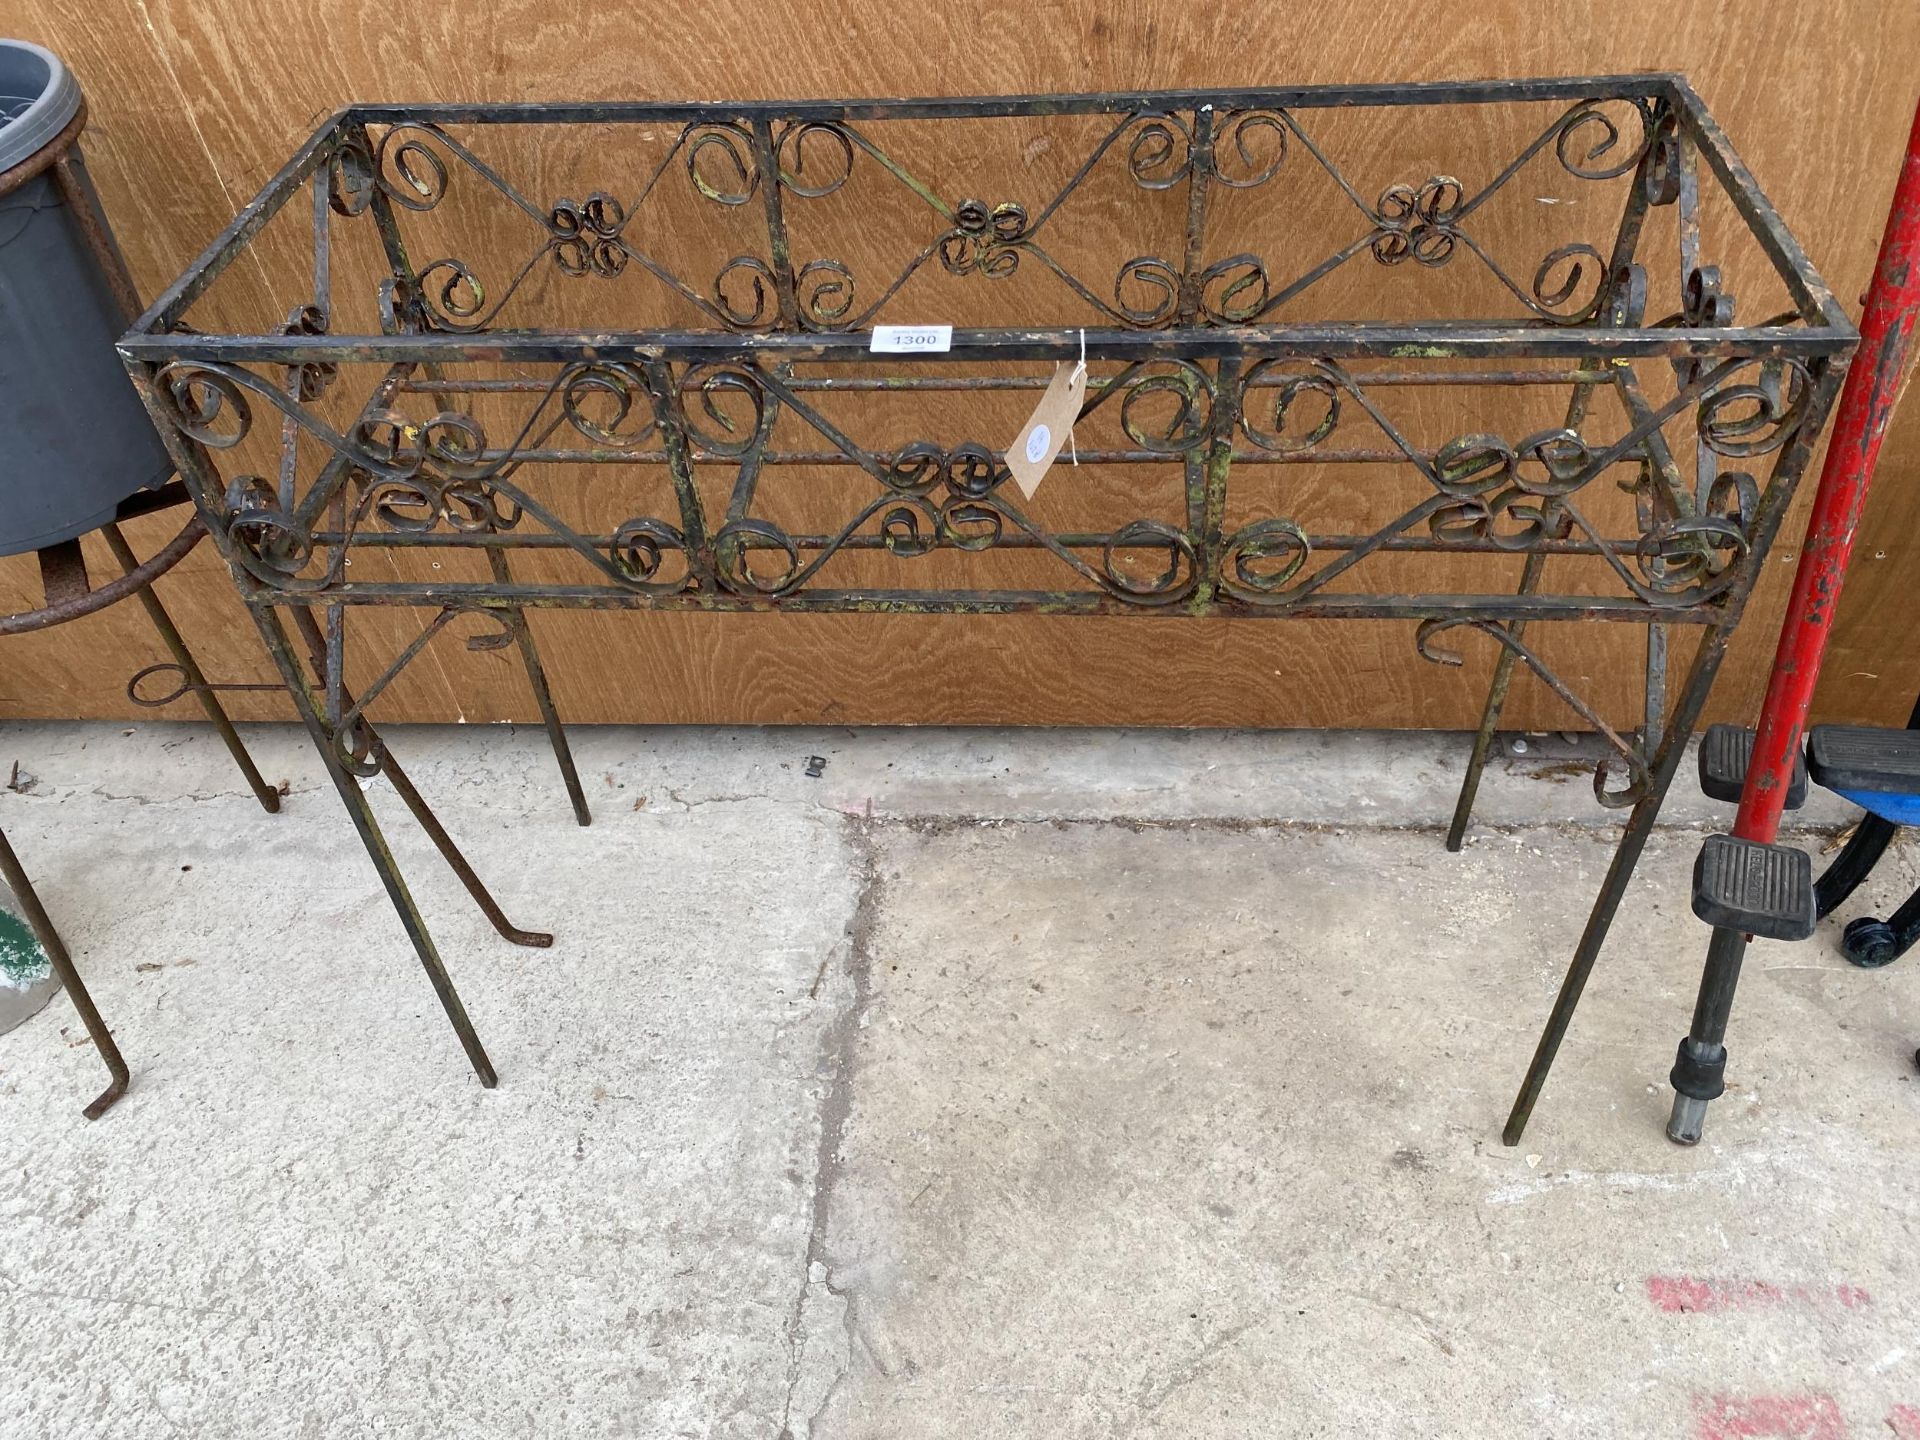 A DECORATIVE WROUGHT IRON PLANT STAND